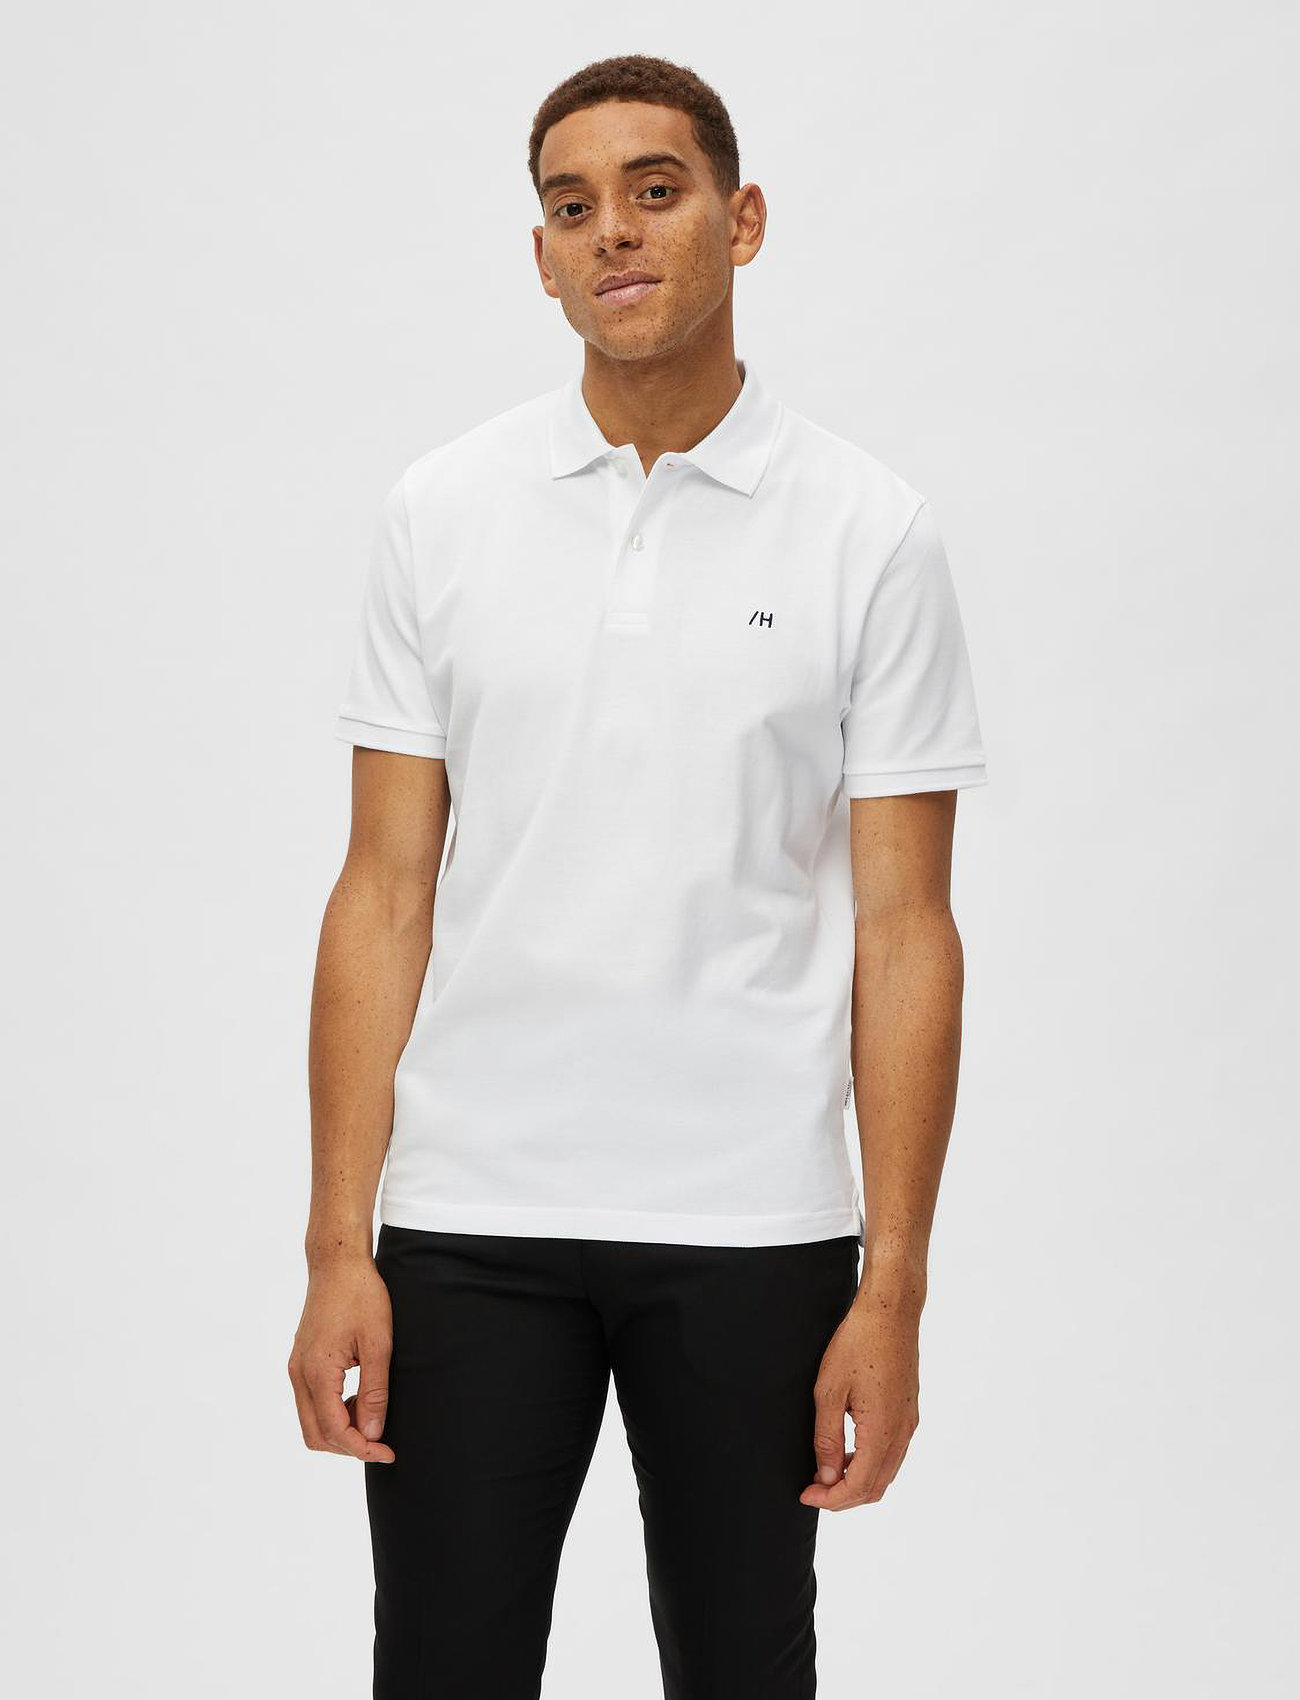 Selected Homme - SLHDANTE SS POLO NOOS - lowest prices - bright white - 1